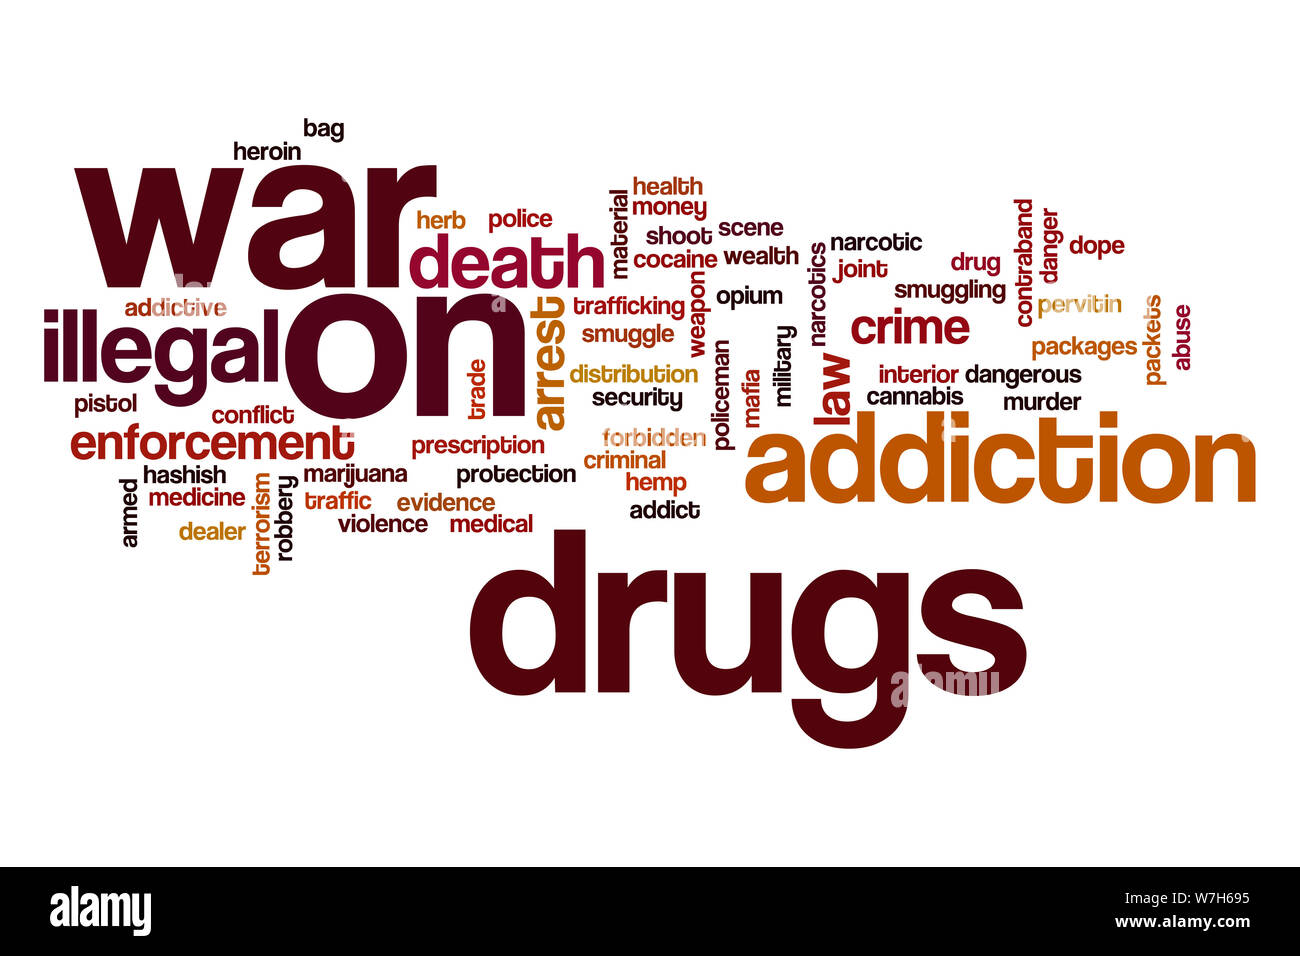 War on drugs word cloud concept Stock Photo